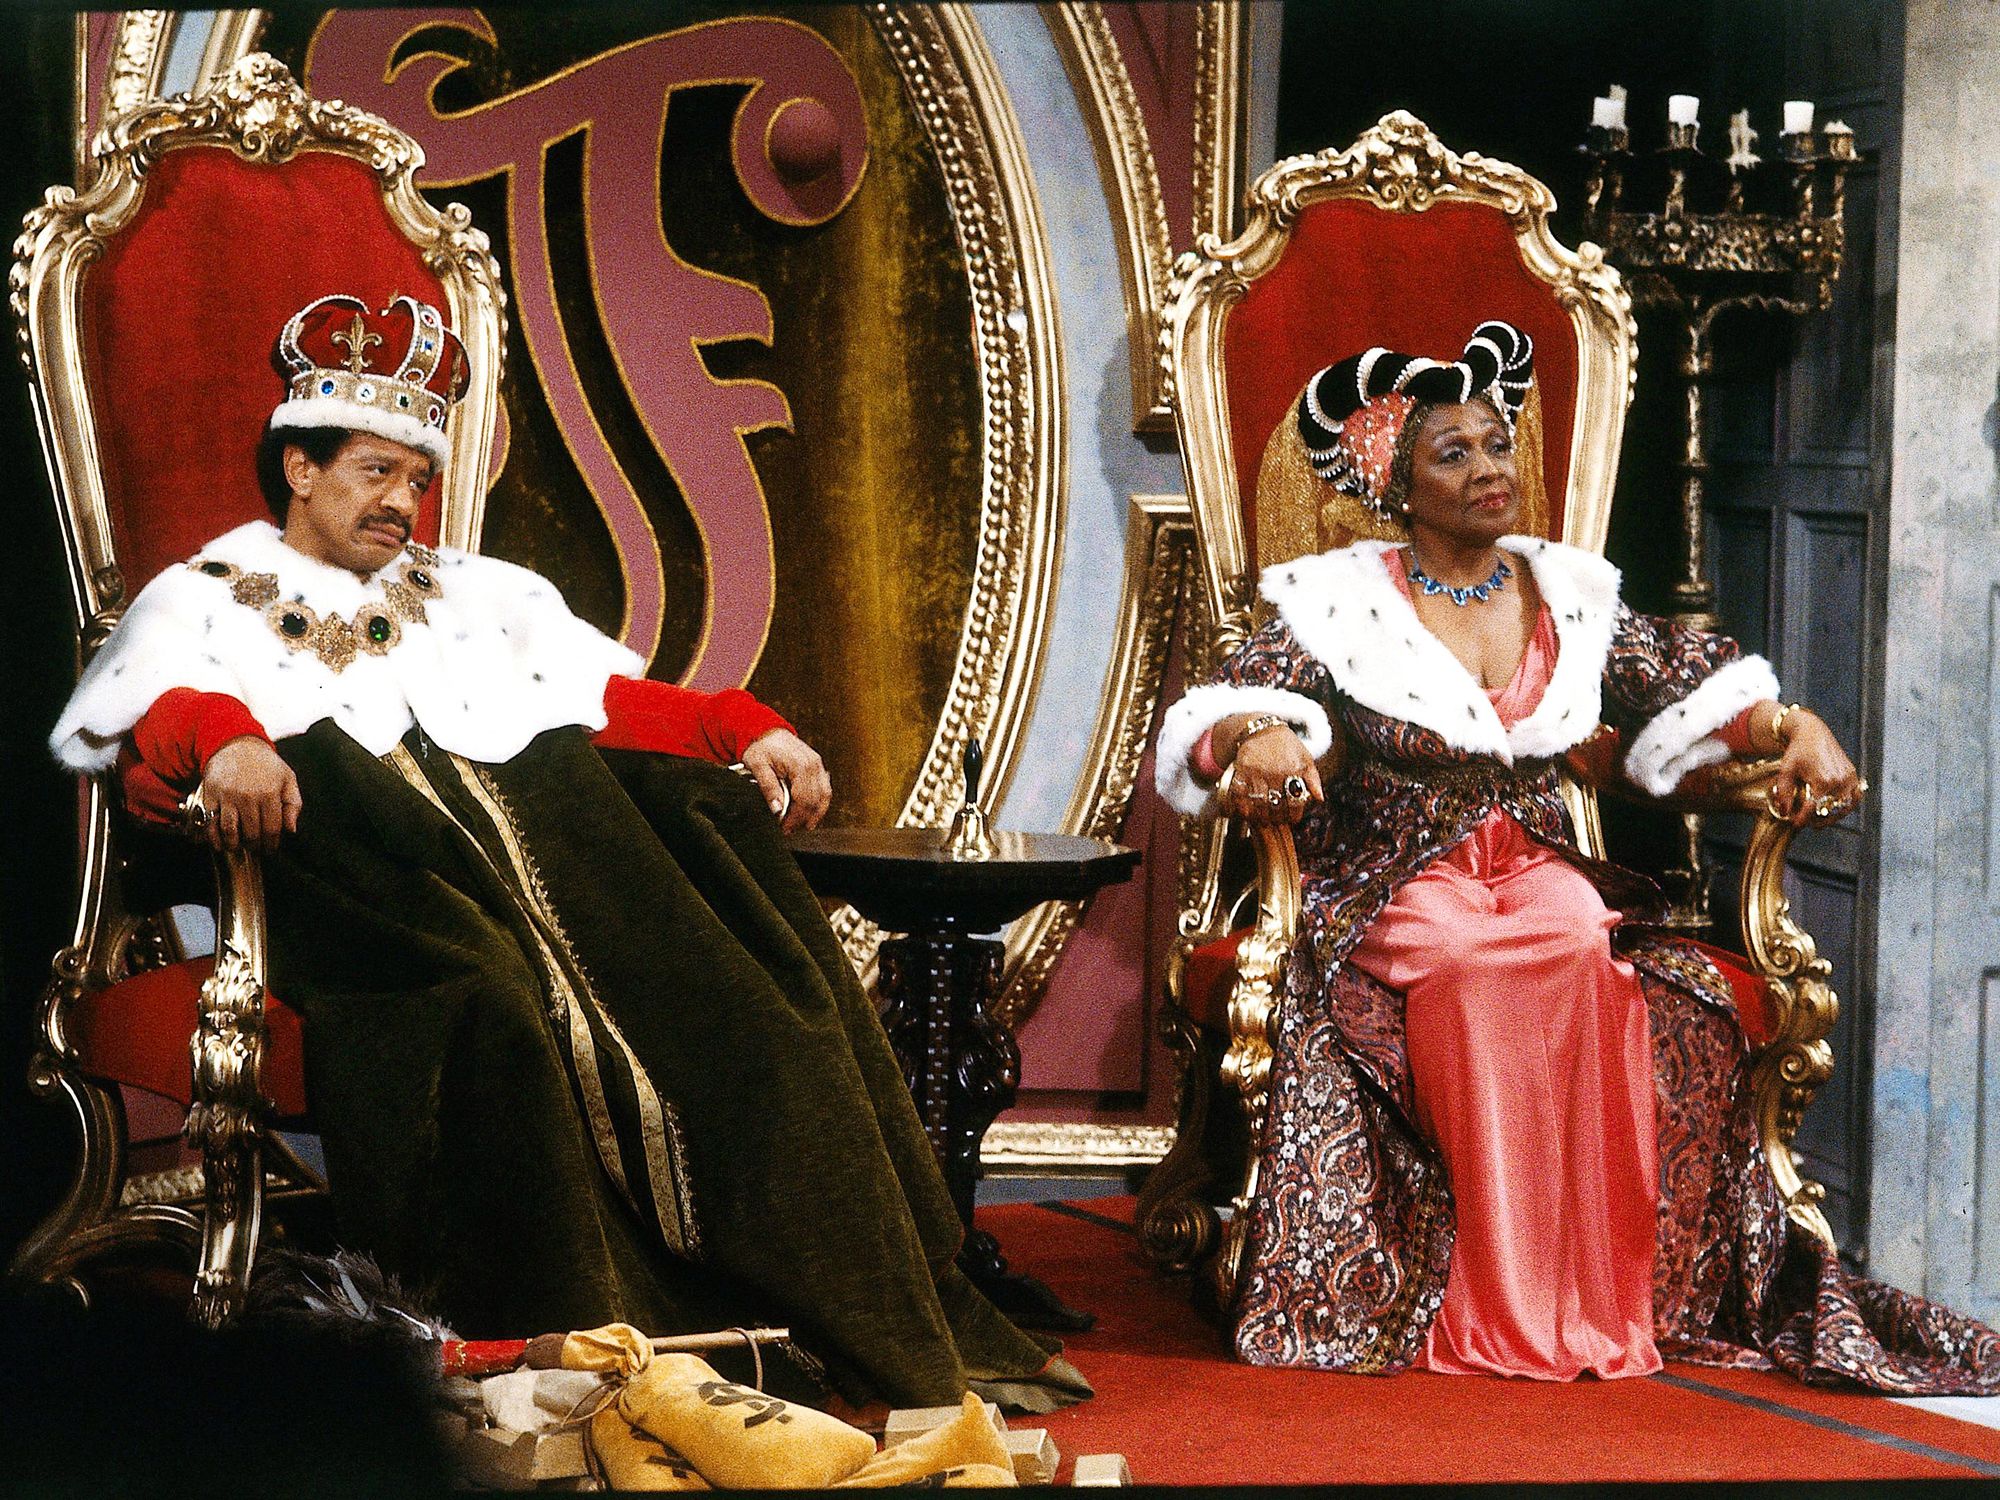 George and Louise Jefferson sit on royal thrones while wearing crowns and regal attire.